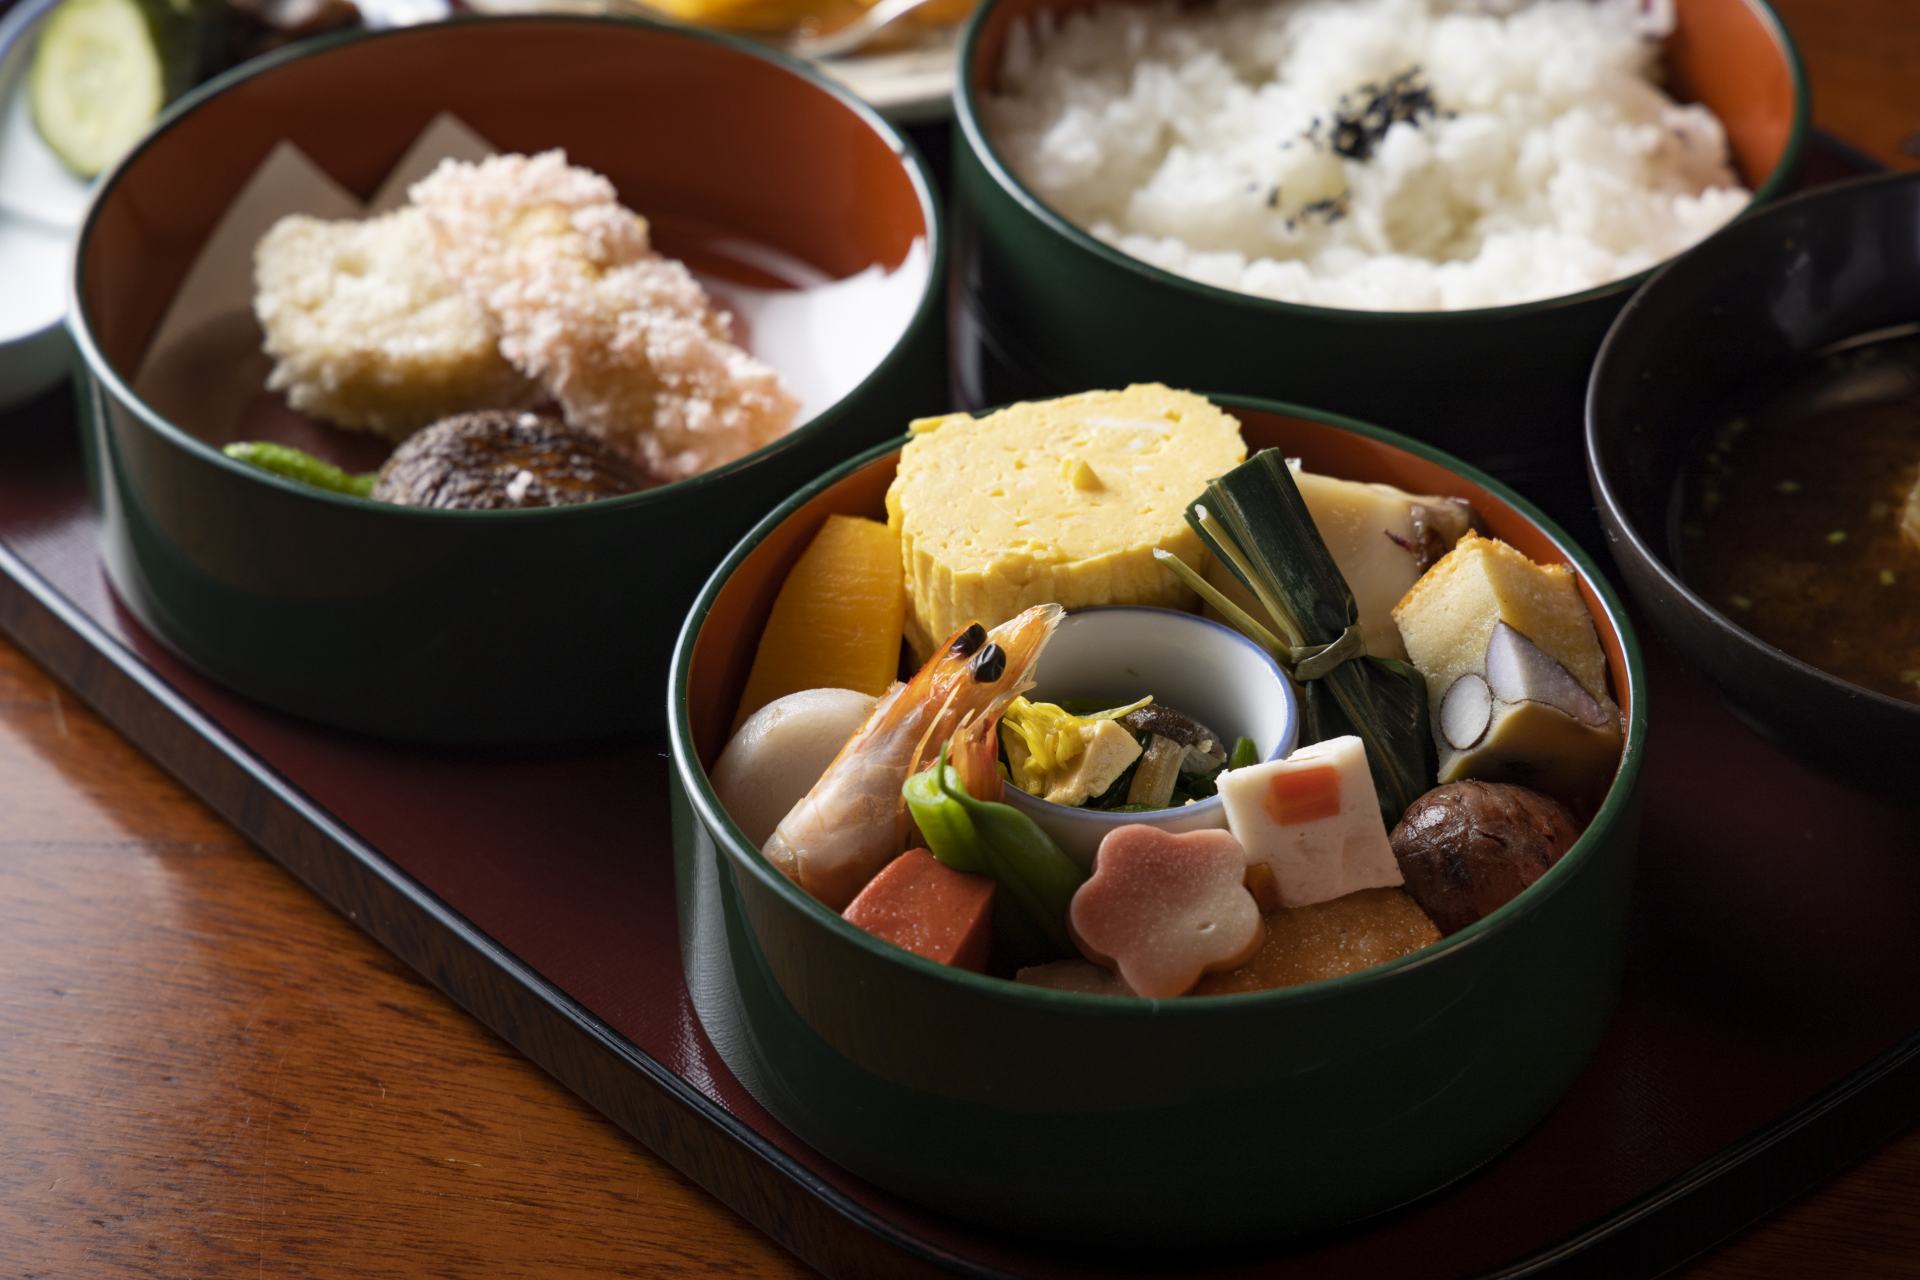 Bamboo shoots are the stars of this traditional Kyoto feast.